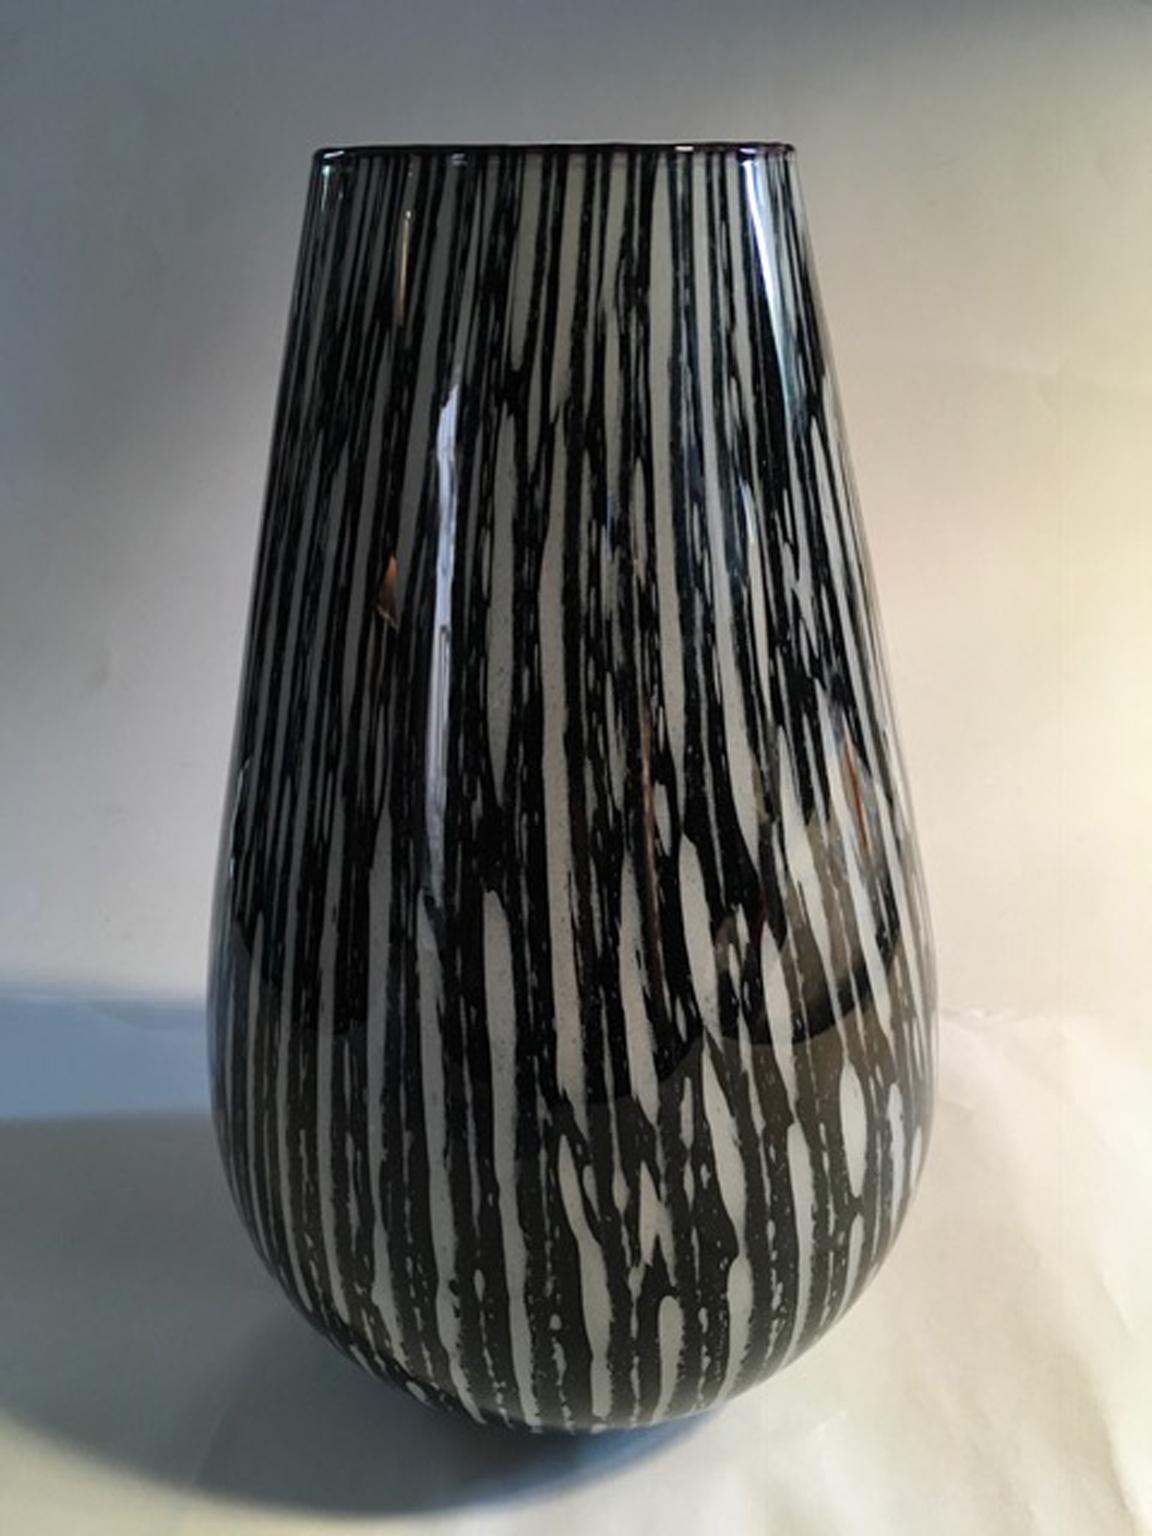 It's a very pretty Murano glass Vase, in black and white and details in blue made in the Italian Modern design of 1960'.

An elegant centerpiece or flower vase.
With certificate of Authenticity.